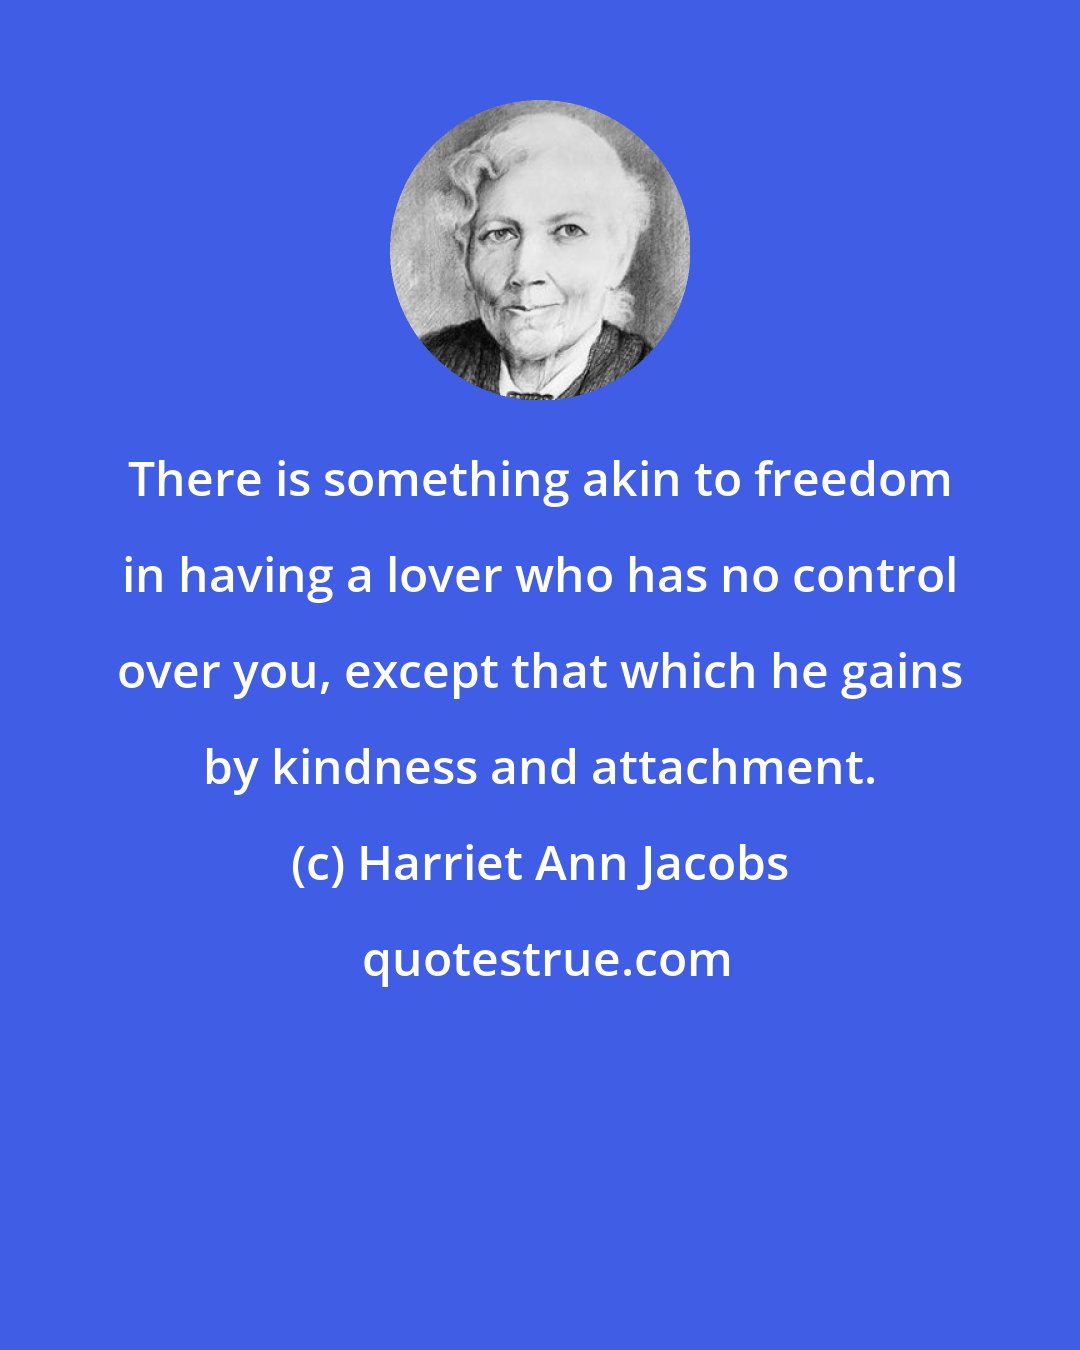 Harriet Ann Jacobs: There is something akin to freedom in having a lover who has no control over you, except that which he gains by kindness and attachment.